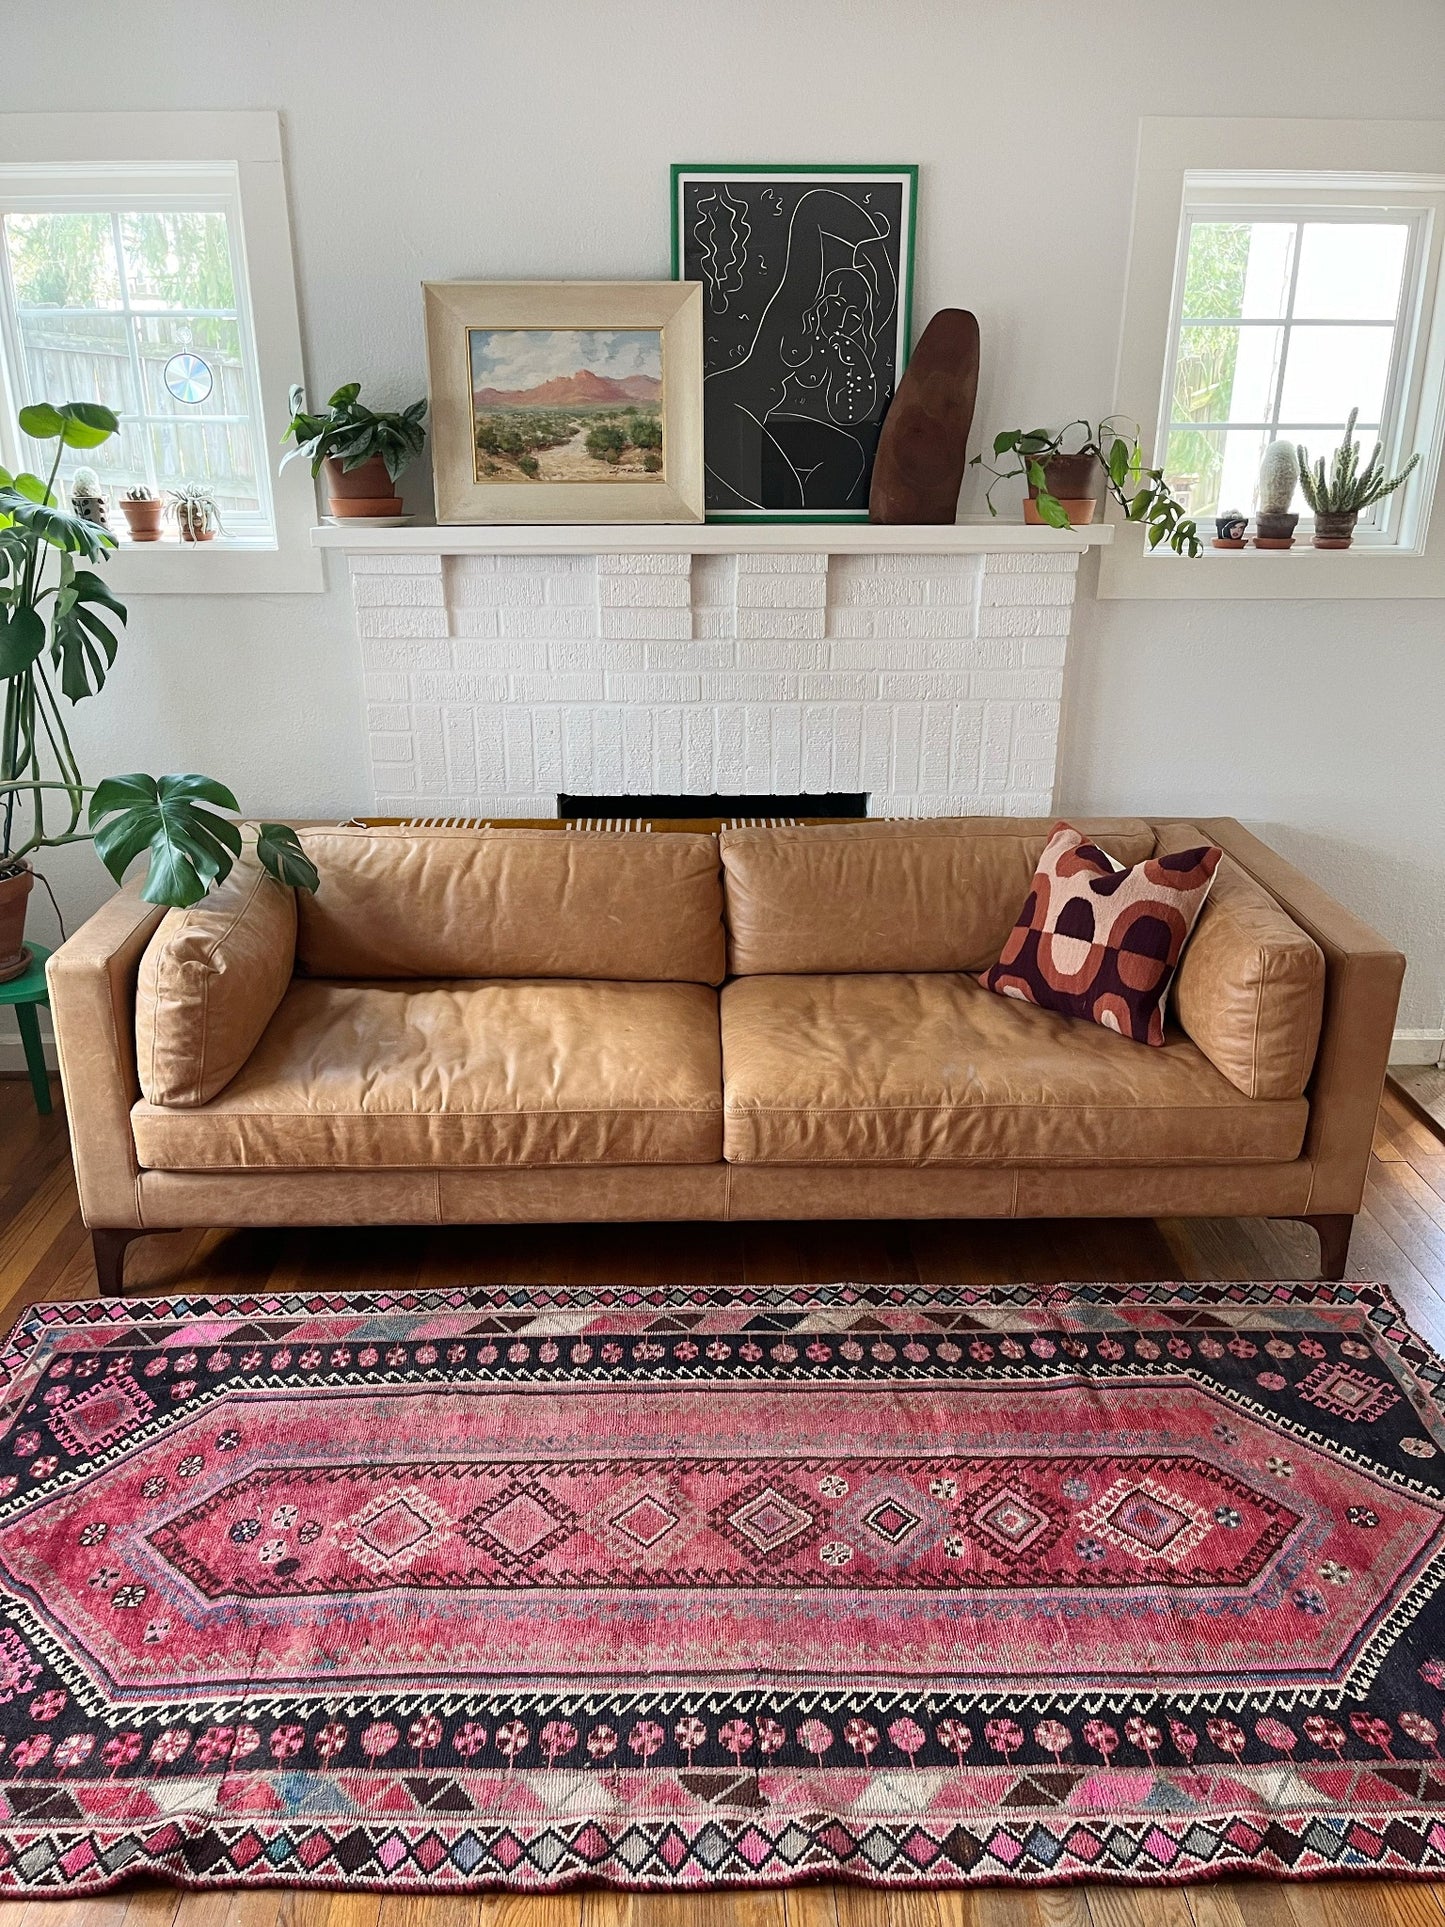 Style Phlox Vintage Persian Rug in a Living Room